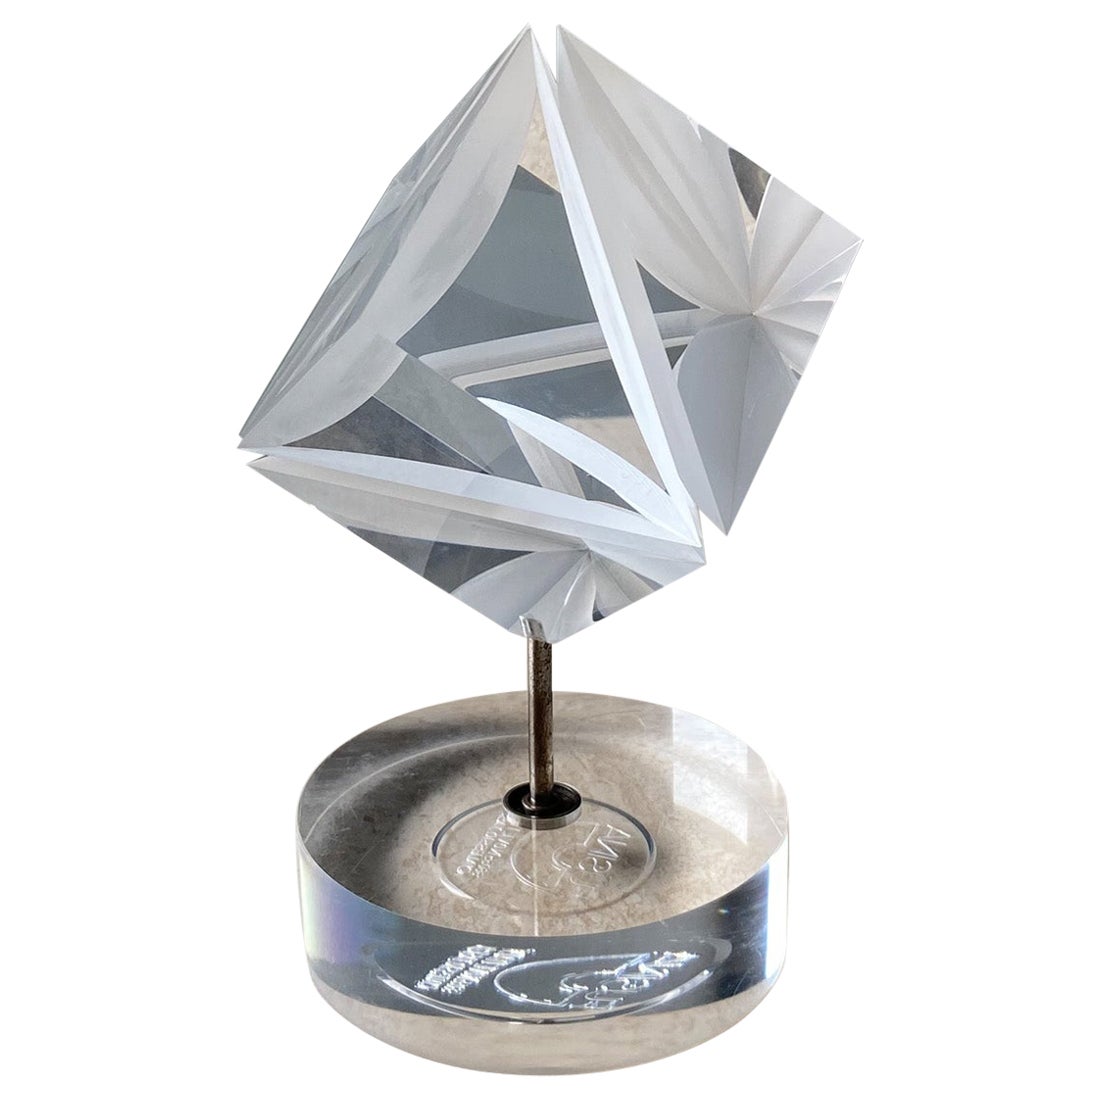 Alessio Tasca for Fusina Acrylic Prism Sculpture, 1970s  For Sale